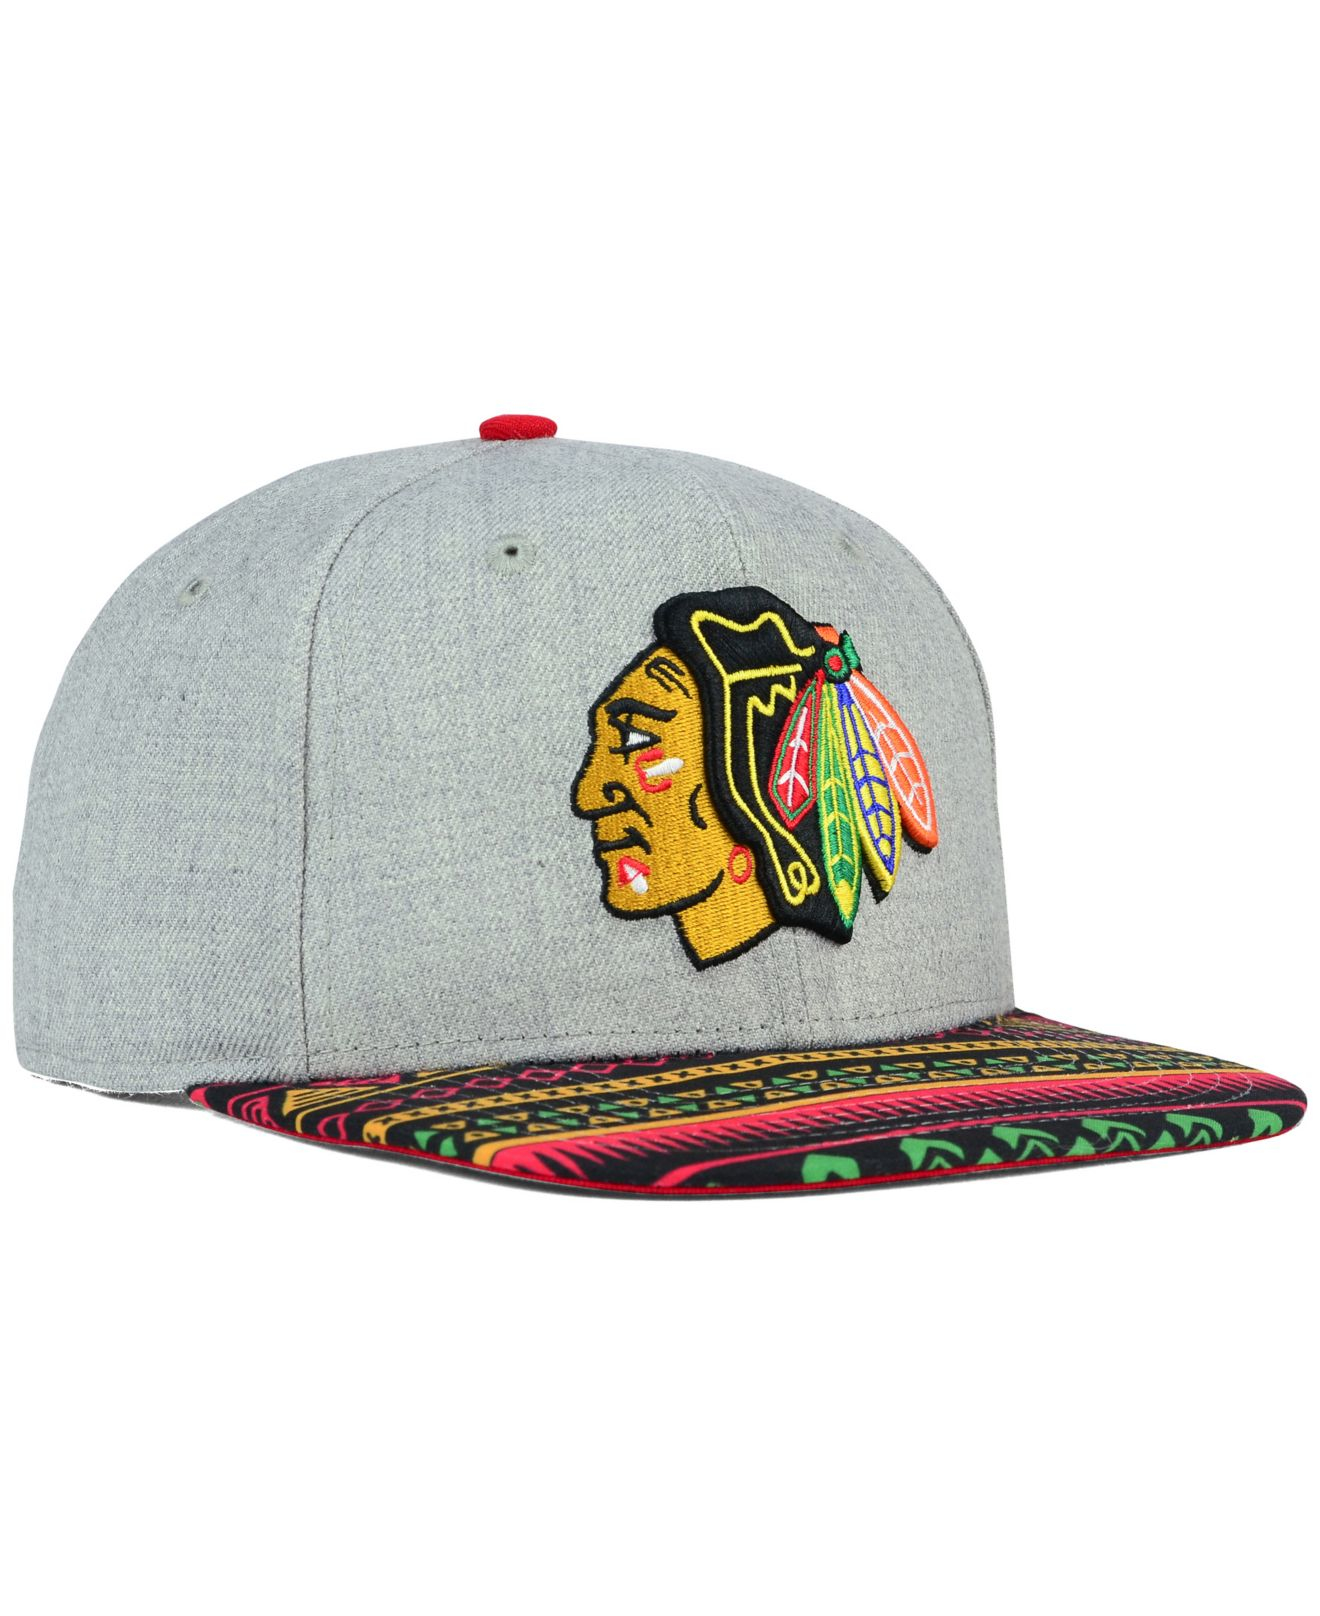 New Era Neon Lights Black Chicago Blackhawks 59FIFTY Fitted Cap